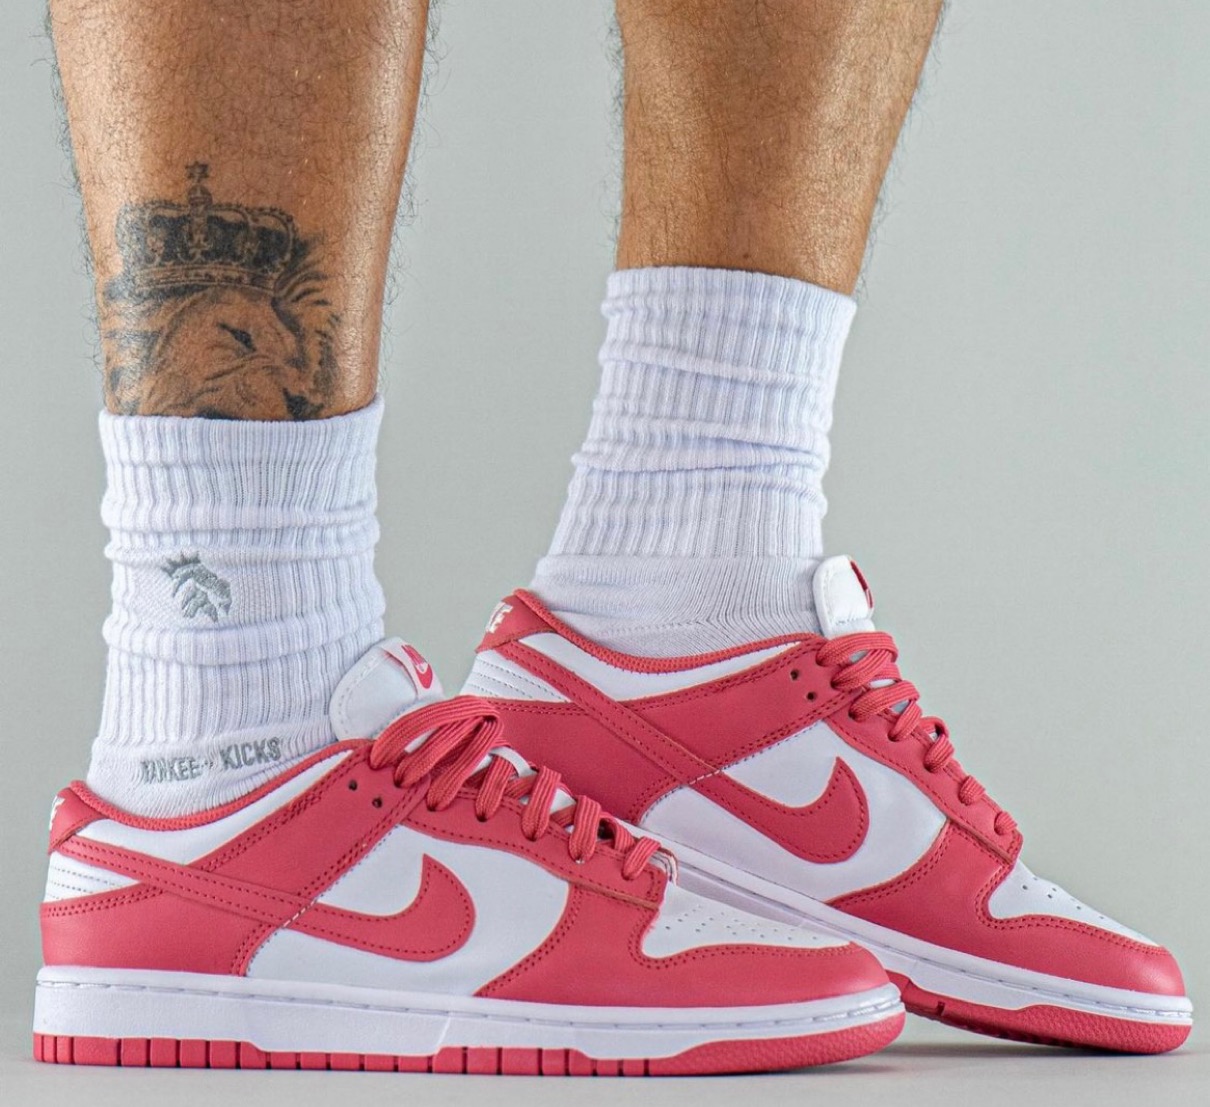 Nike】Wmns Dunk Low “White/Archeo Pink”が国内10月8日〜10月15日にリストック予定 | UP TO DATE